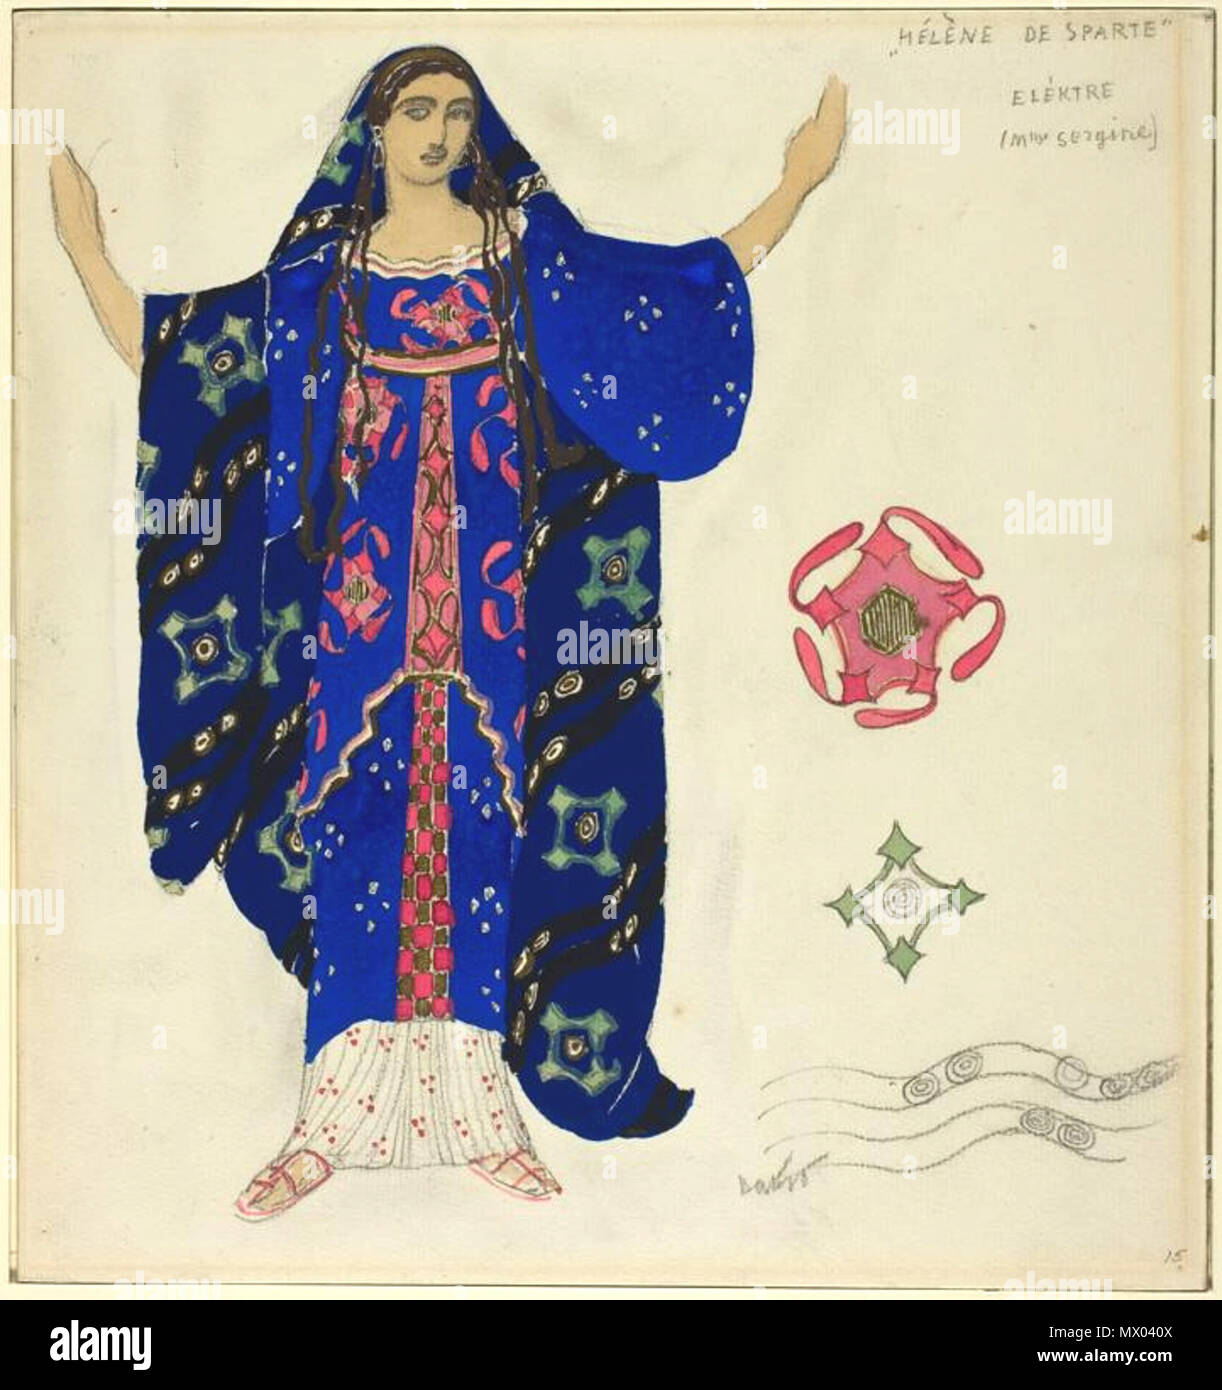 . Léon Bakst Russian, 1868-1924 Costume Design for Electra, for Helen of Sparta, n.d. Gouache and watercolor, with graphite and metallic paint, on ivory laid paper, laid down on tan board 270 x 254 mm Sidney A. Kent Fund, 1920.2523 . 20th century. Bakst 183 Electra, for Helen of Sparta by L.Bakst Stock Photo